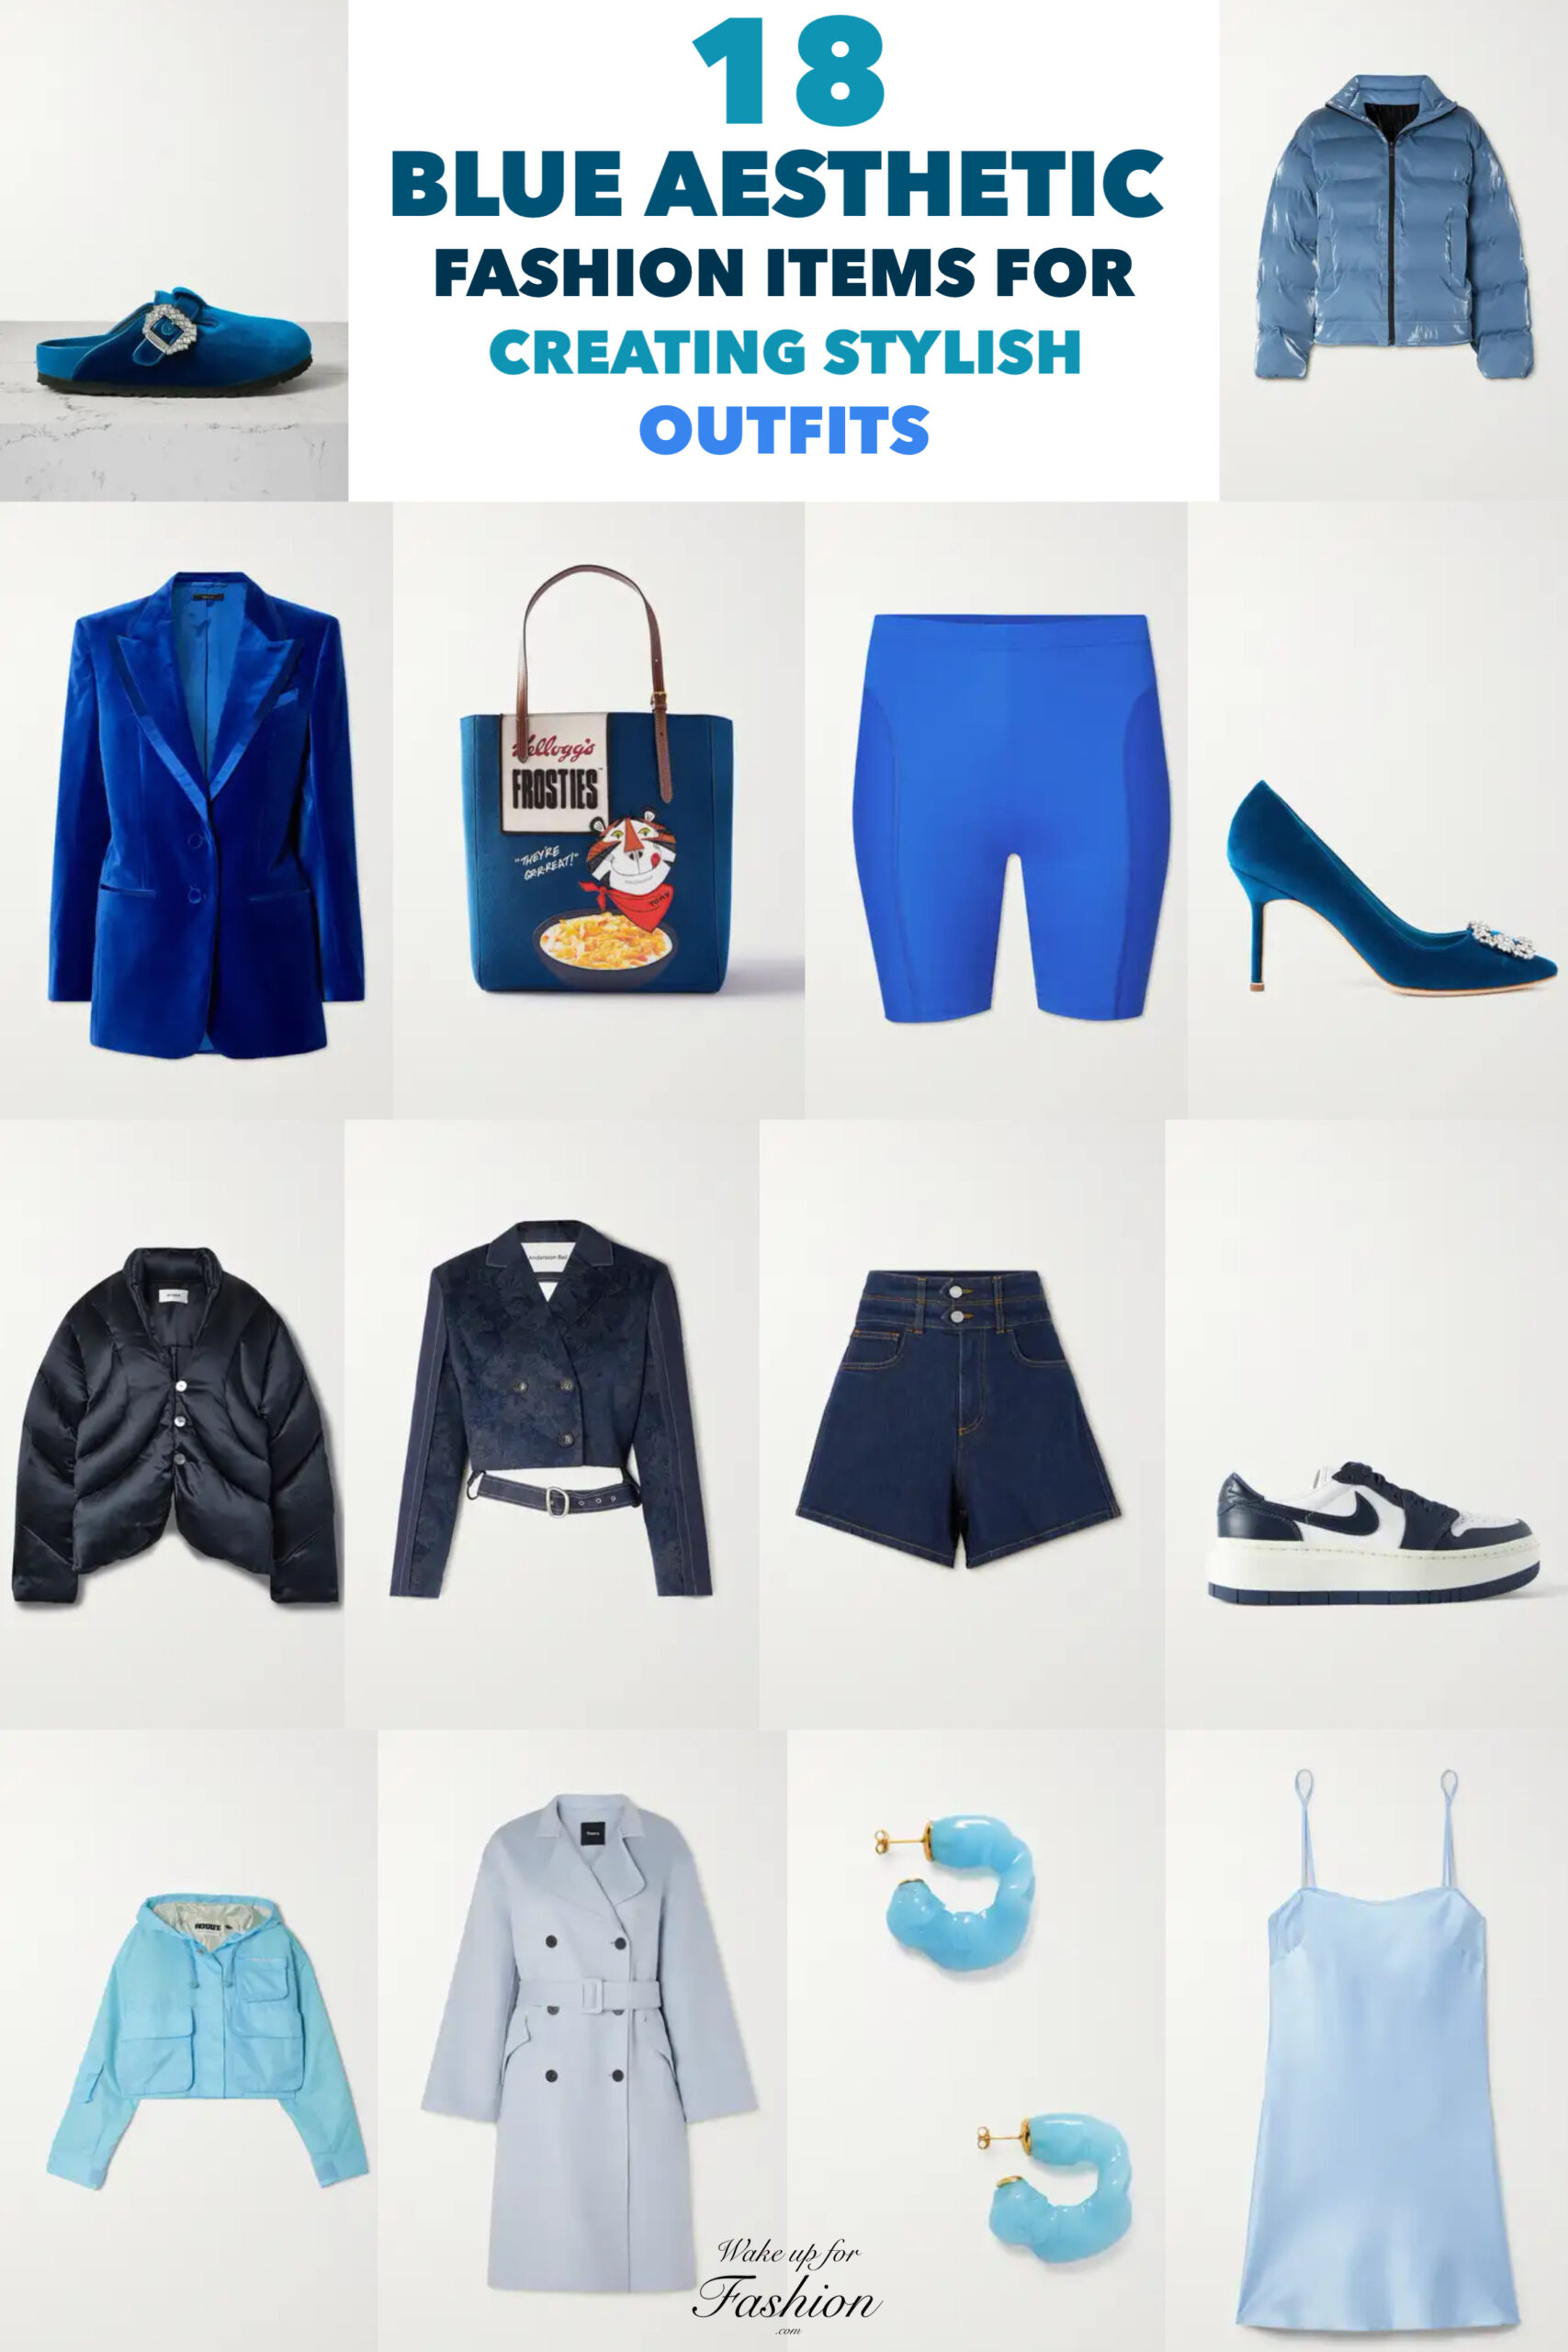 18 Items To Create Aesthetic Blue Outfits - Wake Up For Fashion